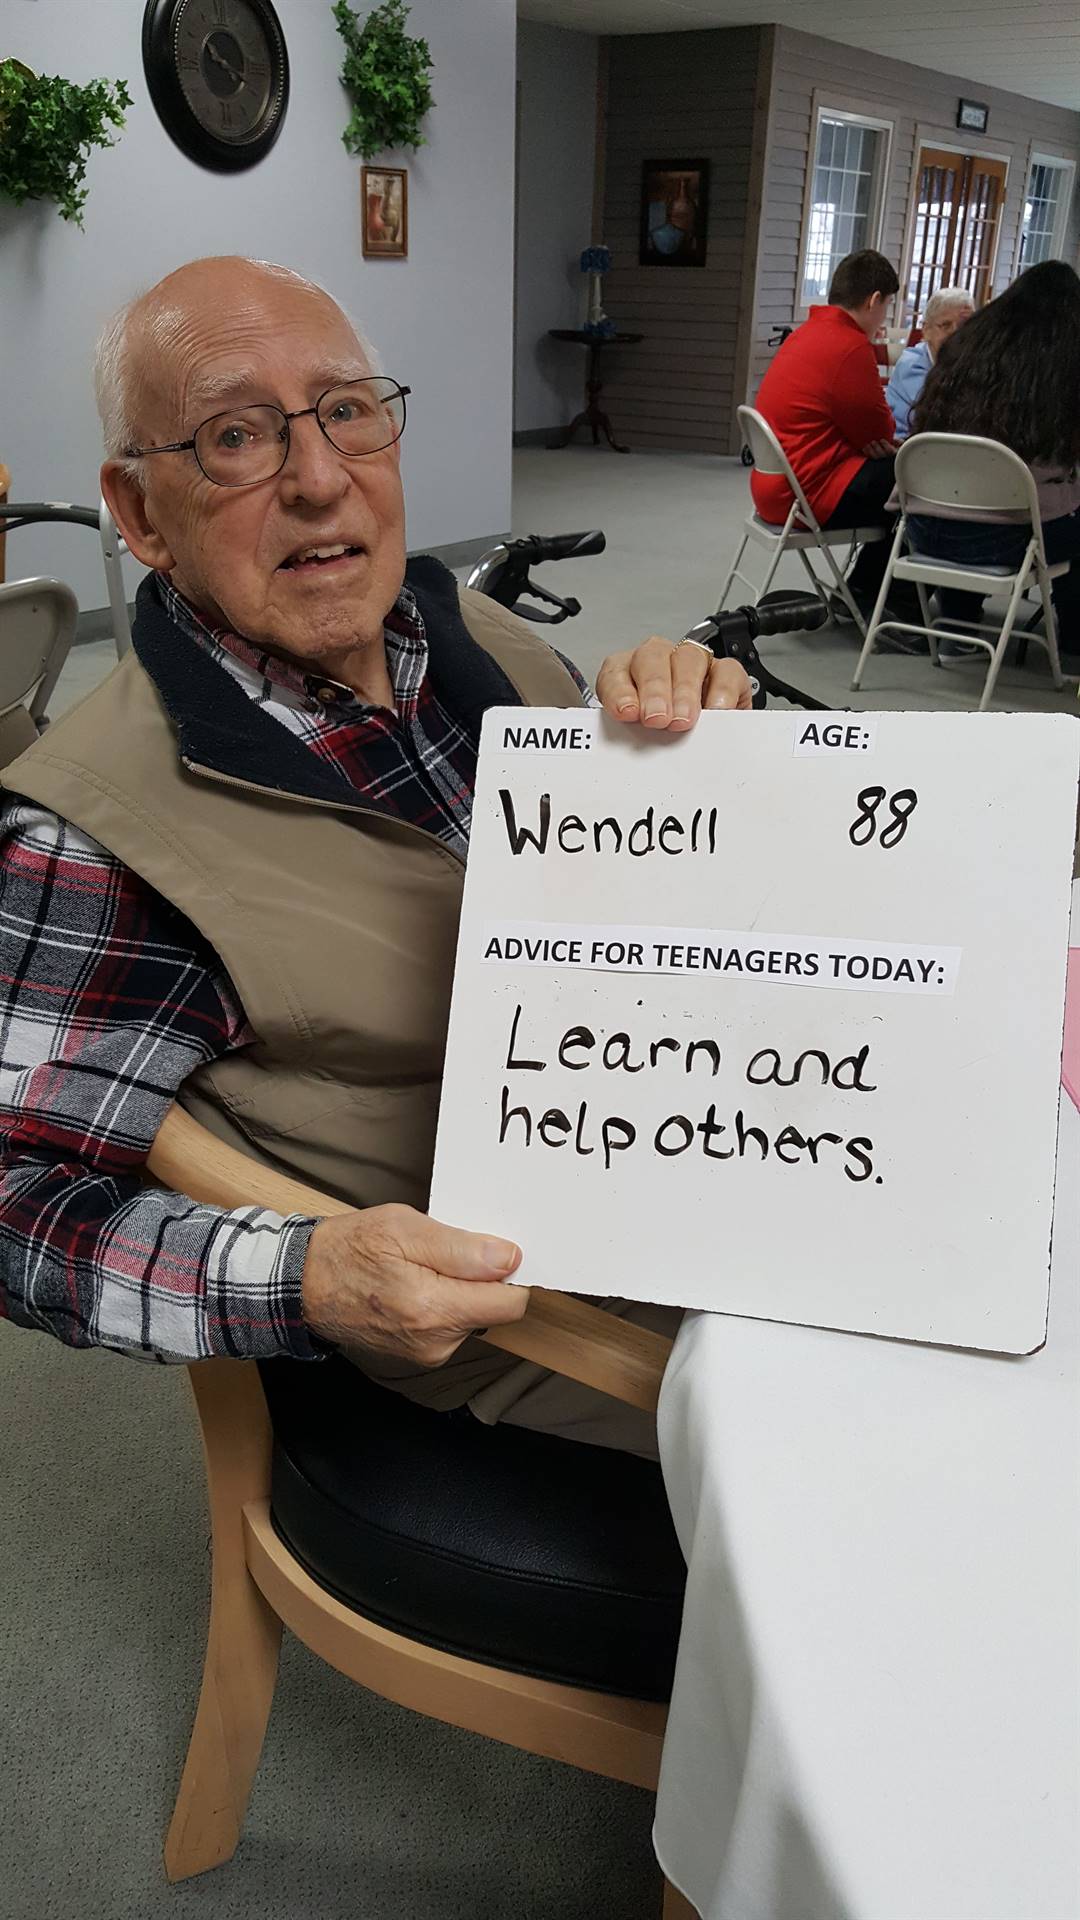 Learn and help others - Mr. Wendell, 88 years young